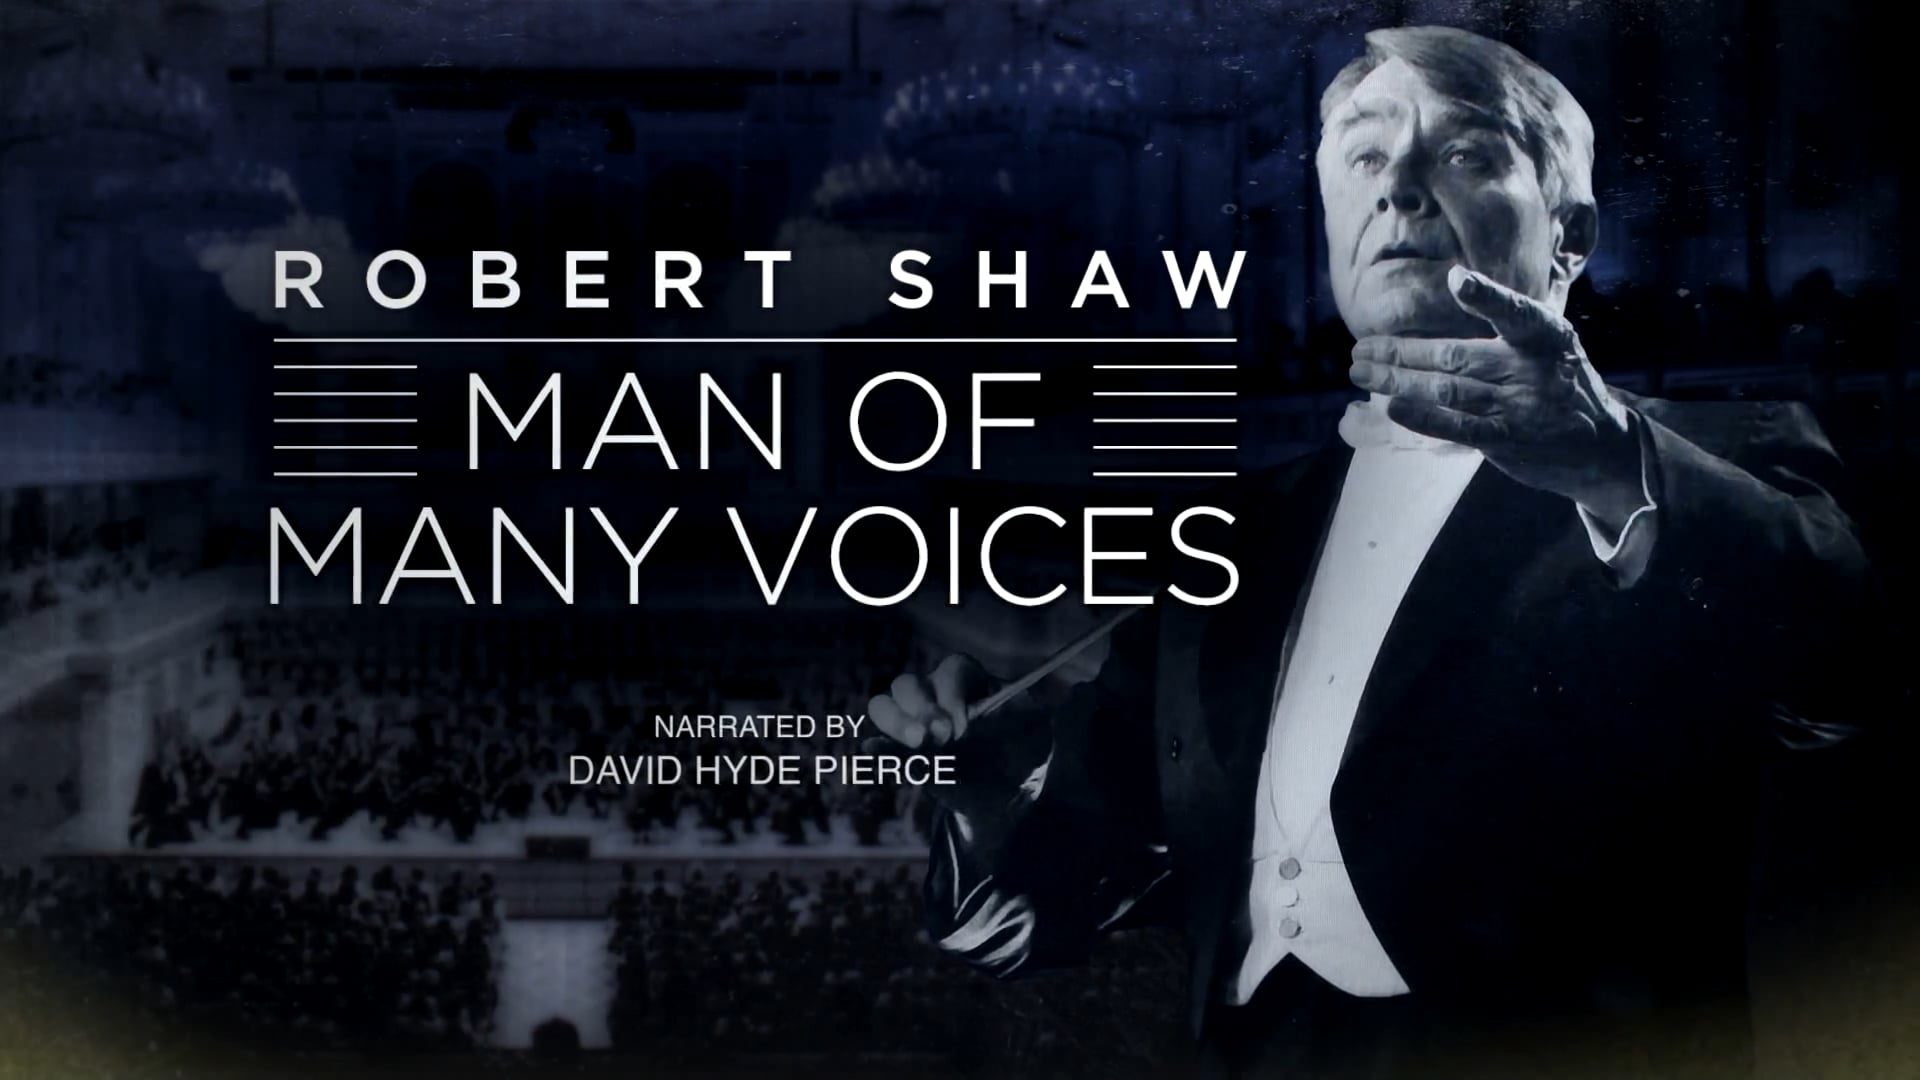 Robert Shaw: Man of Many Voices Trailer